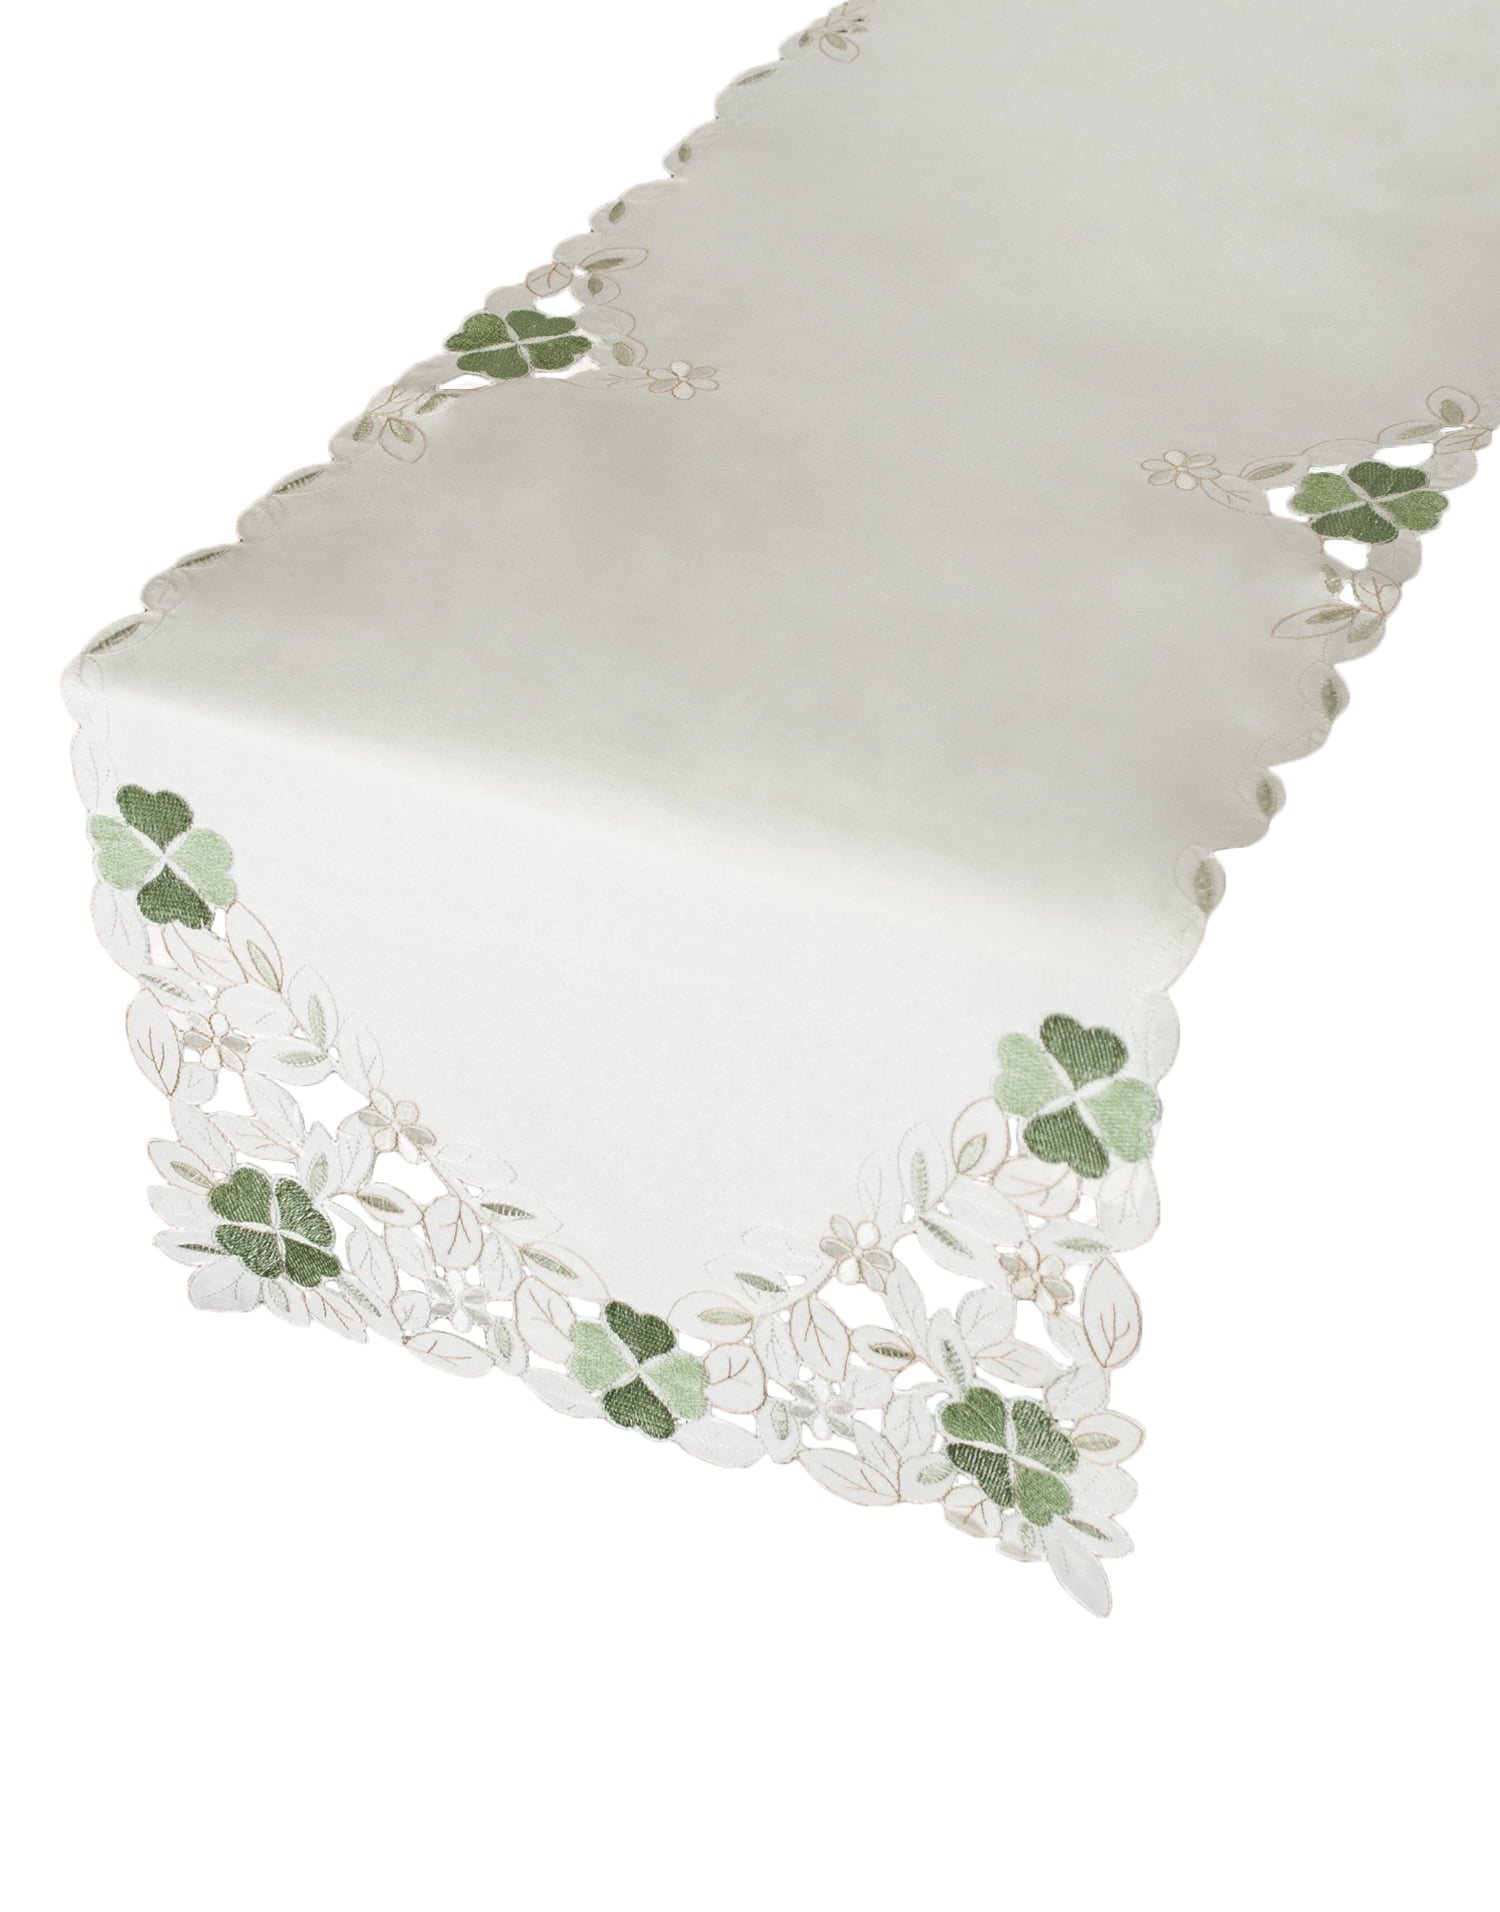 PLACE MATS OR DOILIES SHAMROCK EMBROIDERED TABLECLOTHS CREAM BASE. RUNNERS 